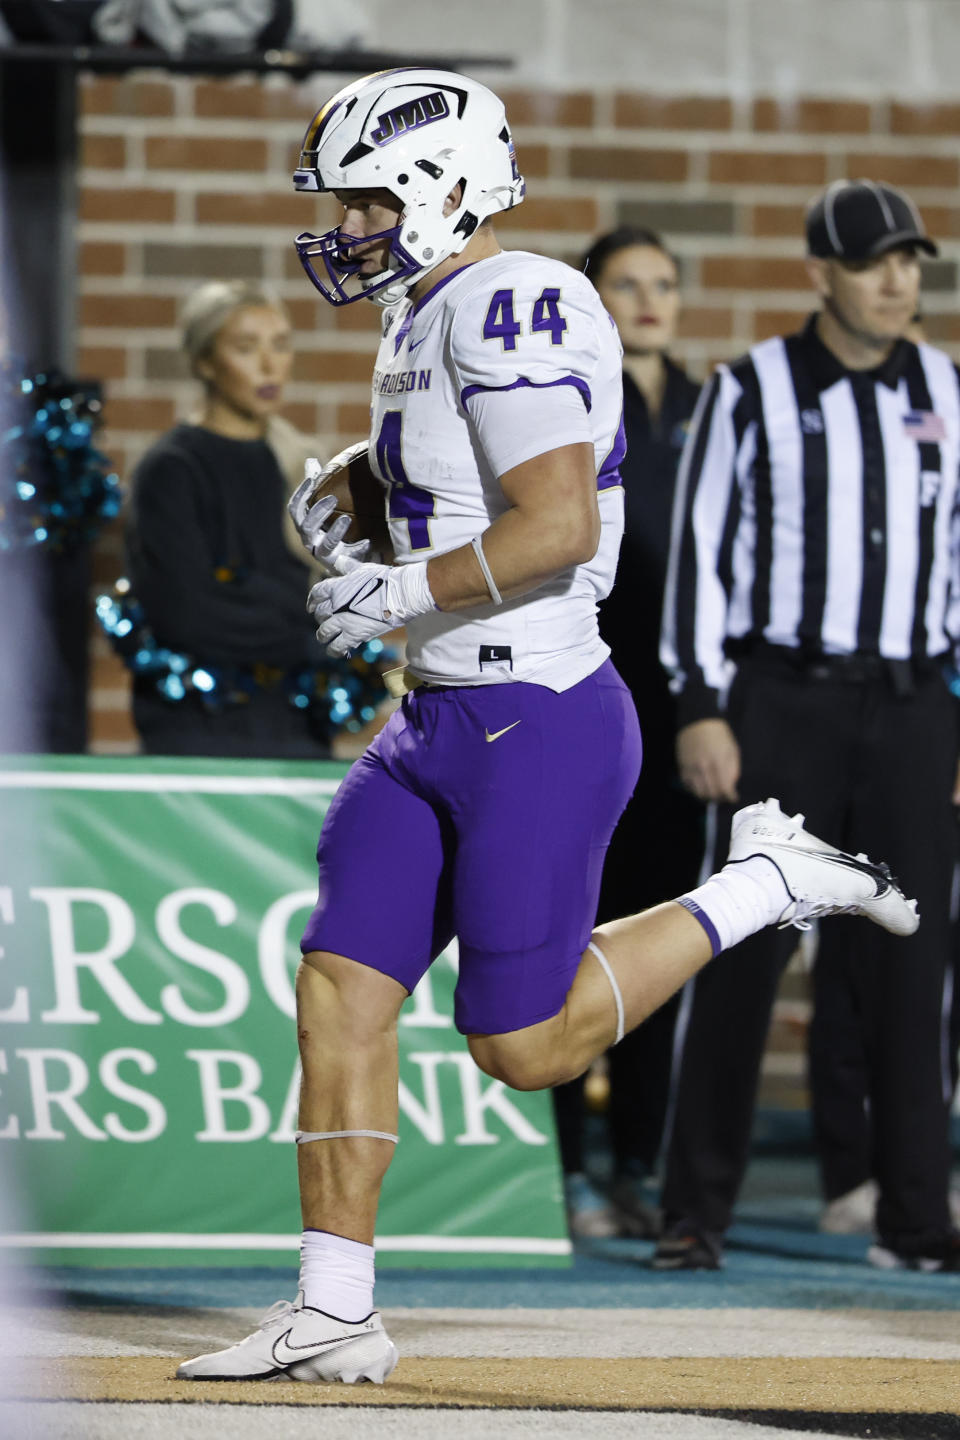 James Madison tight end Zach Horton scores a touchdown against Coastal Carolina during the second half of an NCAA college football game in Conway, N.C., Saturday, Nov. 25, 2023. (AP Photo/Nell Redmond)